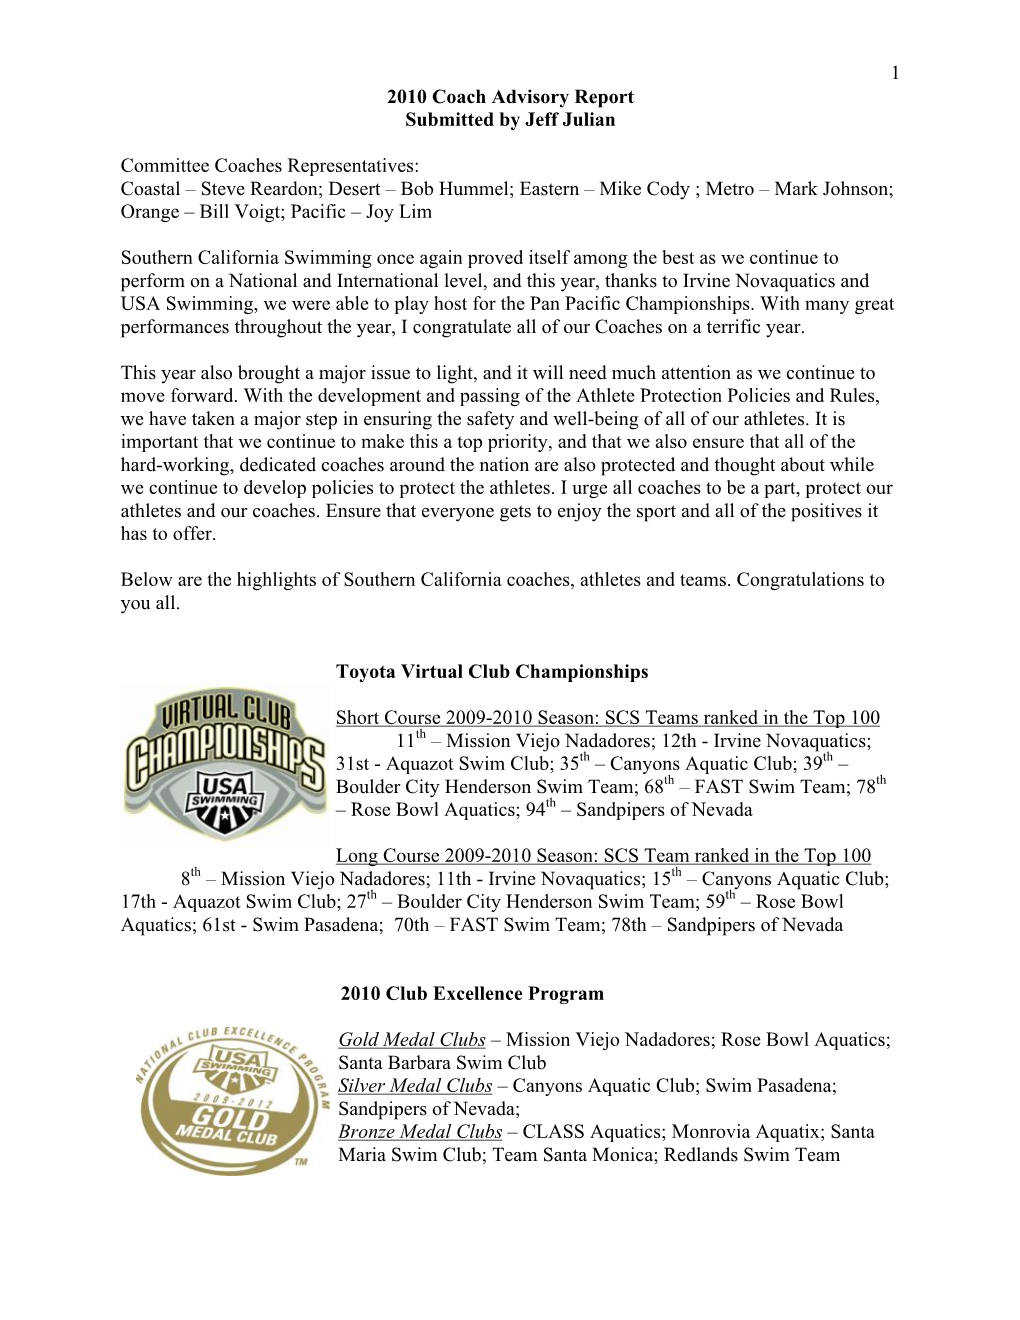 1 2010 Coach Advisory Report Submitted by Jeff Julian Committee